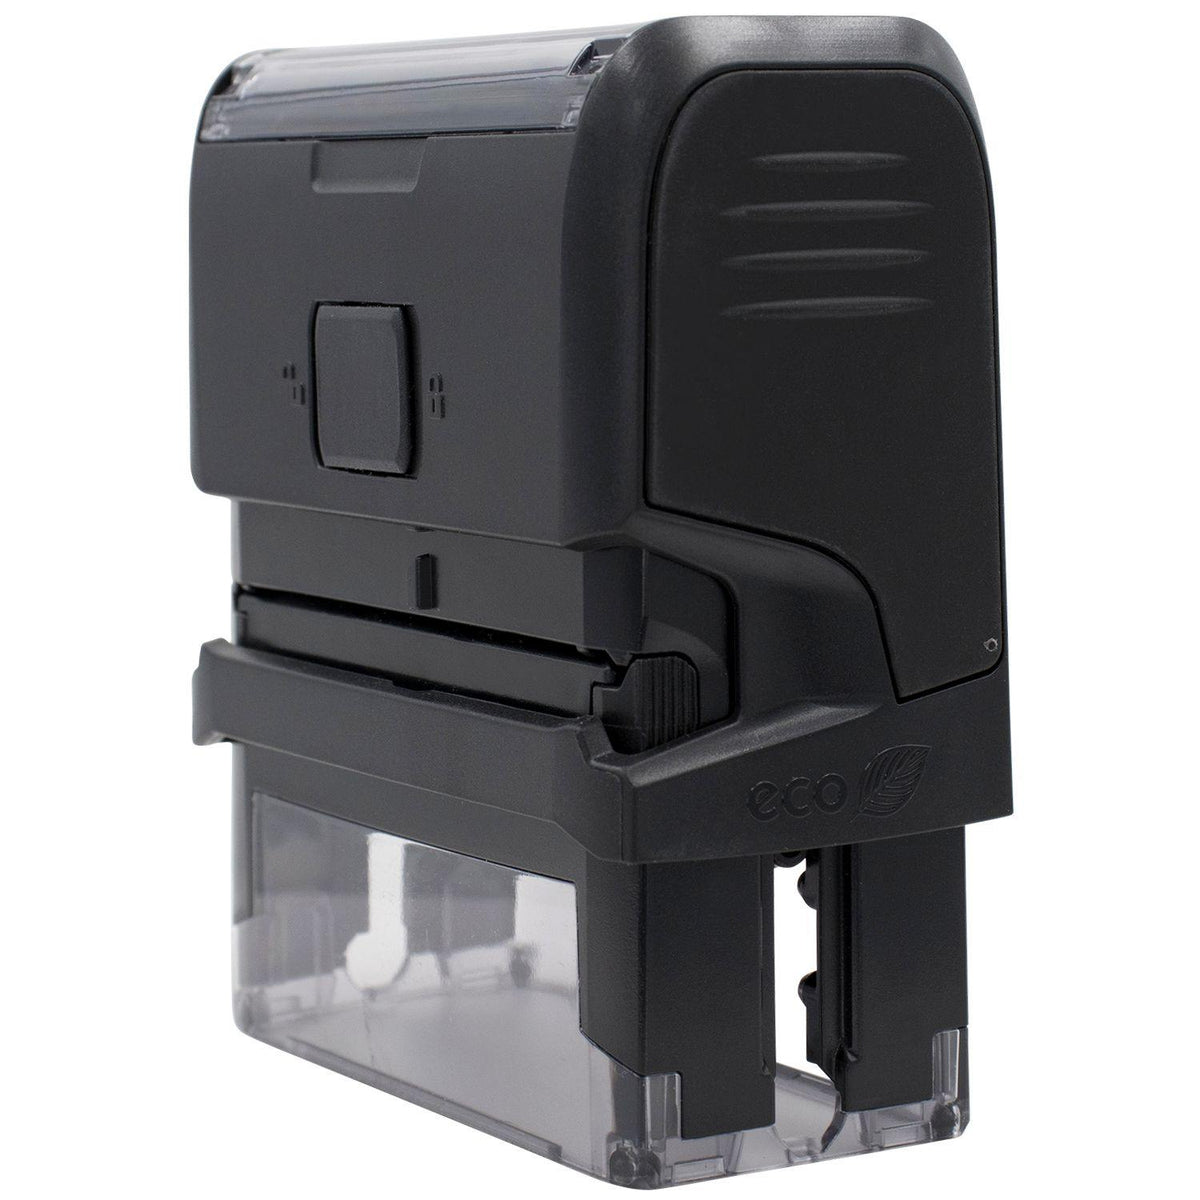 Side View of Large Self-Inking Aviso Stamp at an Angle